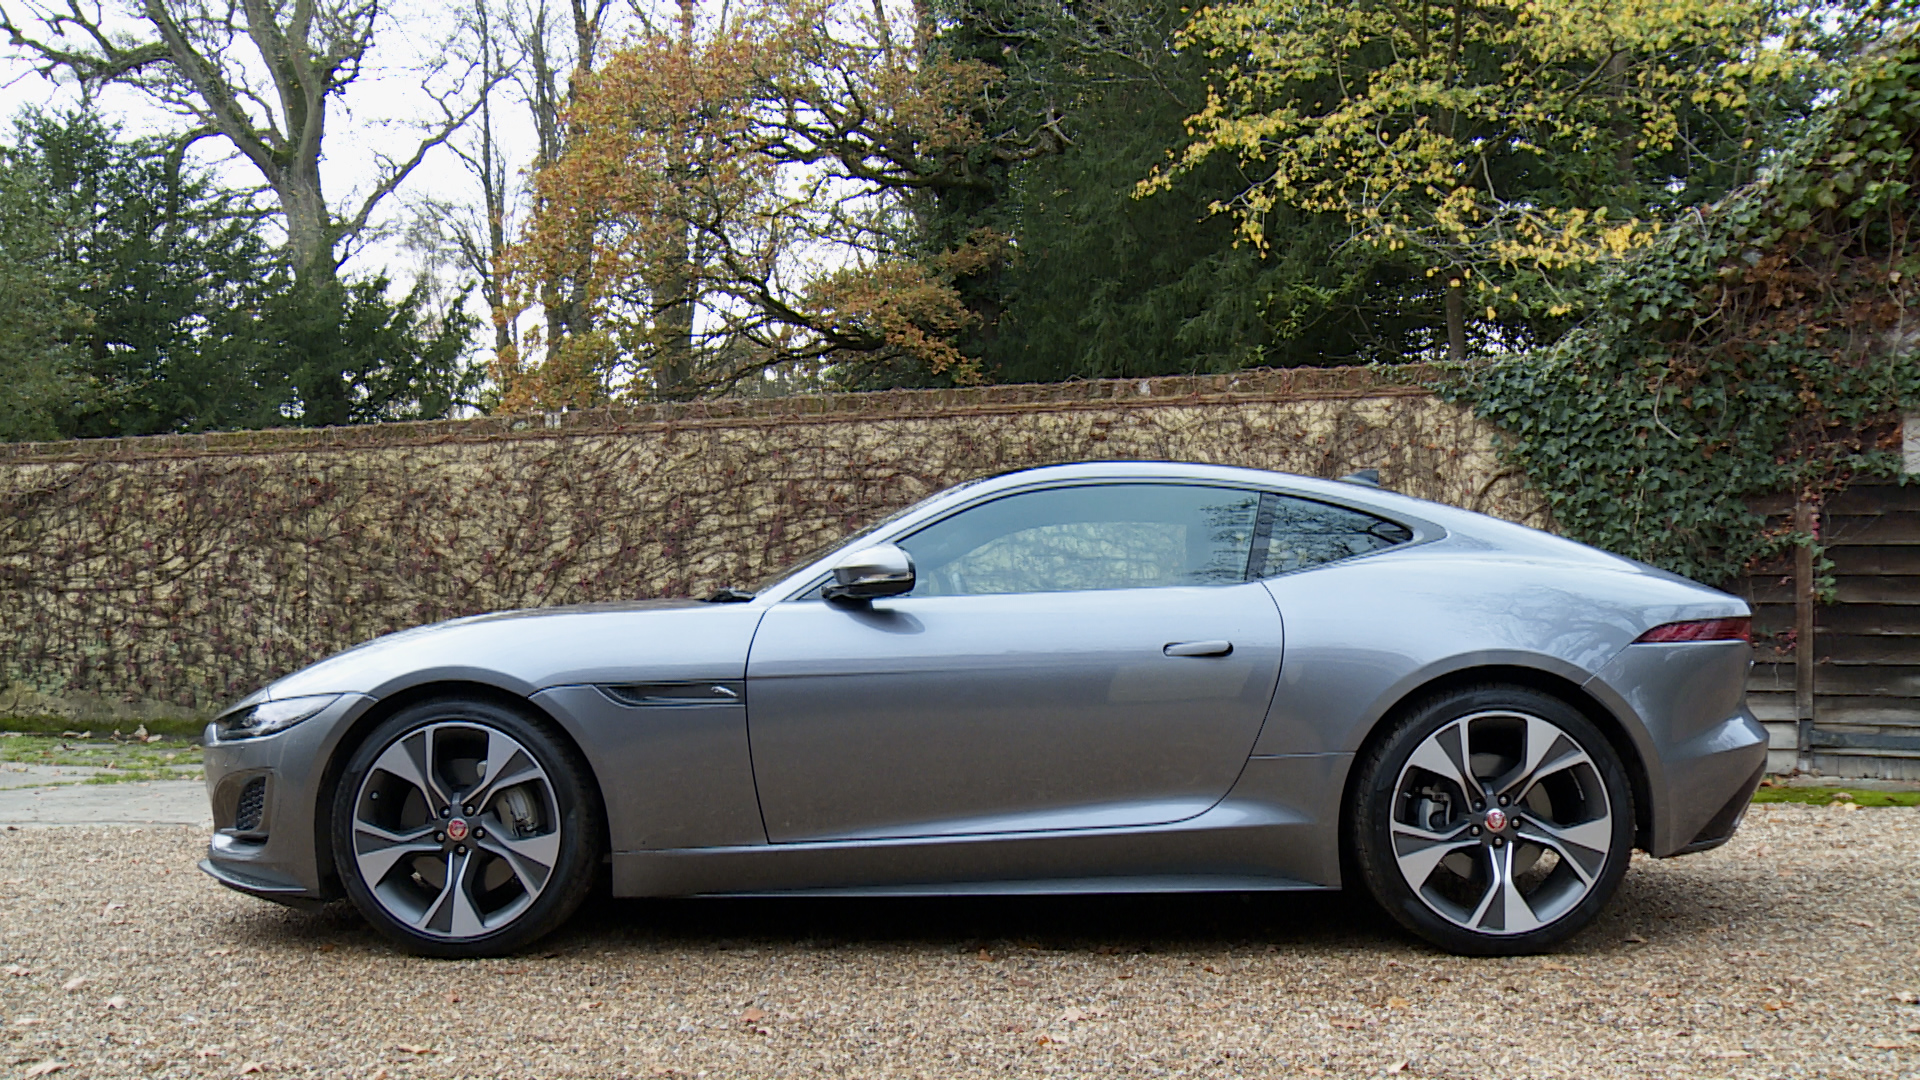 JAGUAR F-TYPE V8 COUPE R-DYNAMIC 5.0 CAR COVER BY ANLOPE